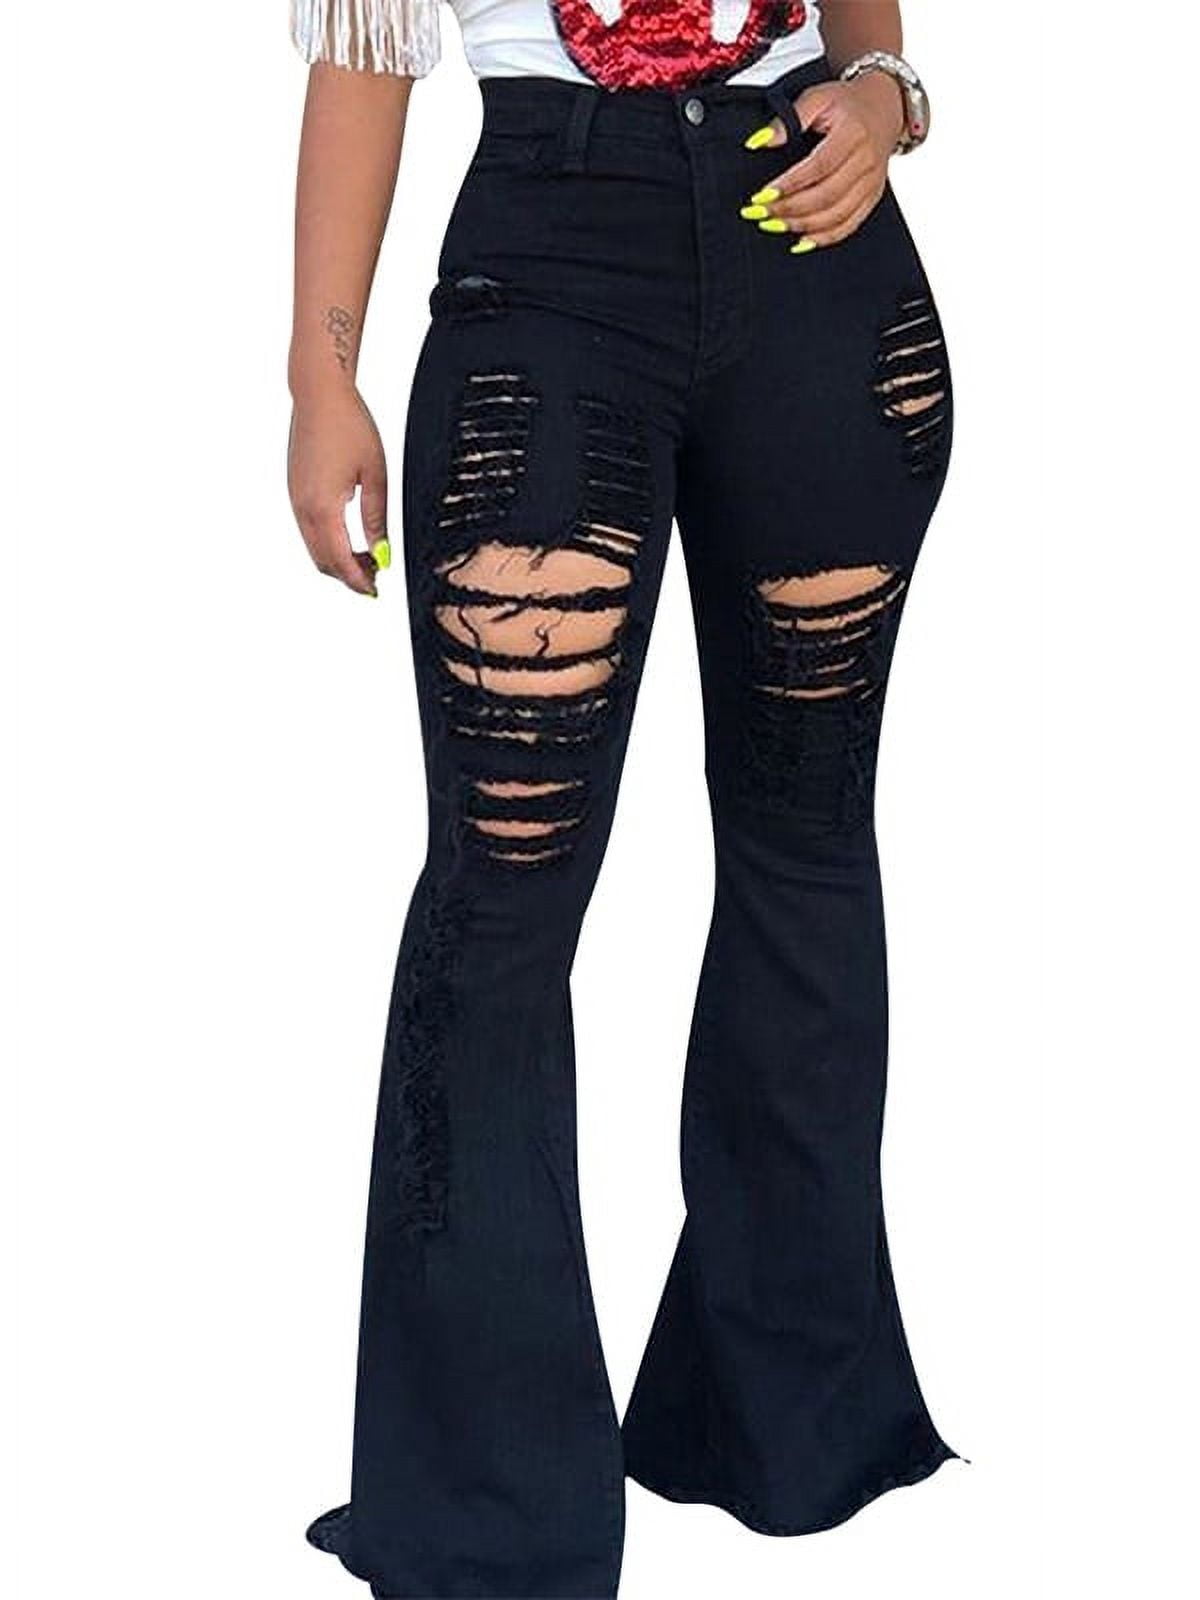 Bell Bottom Jeans for Woman Ripped High Waisted Classic Flared